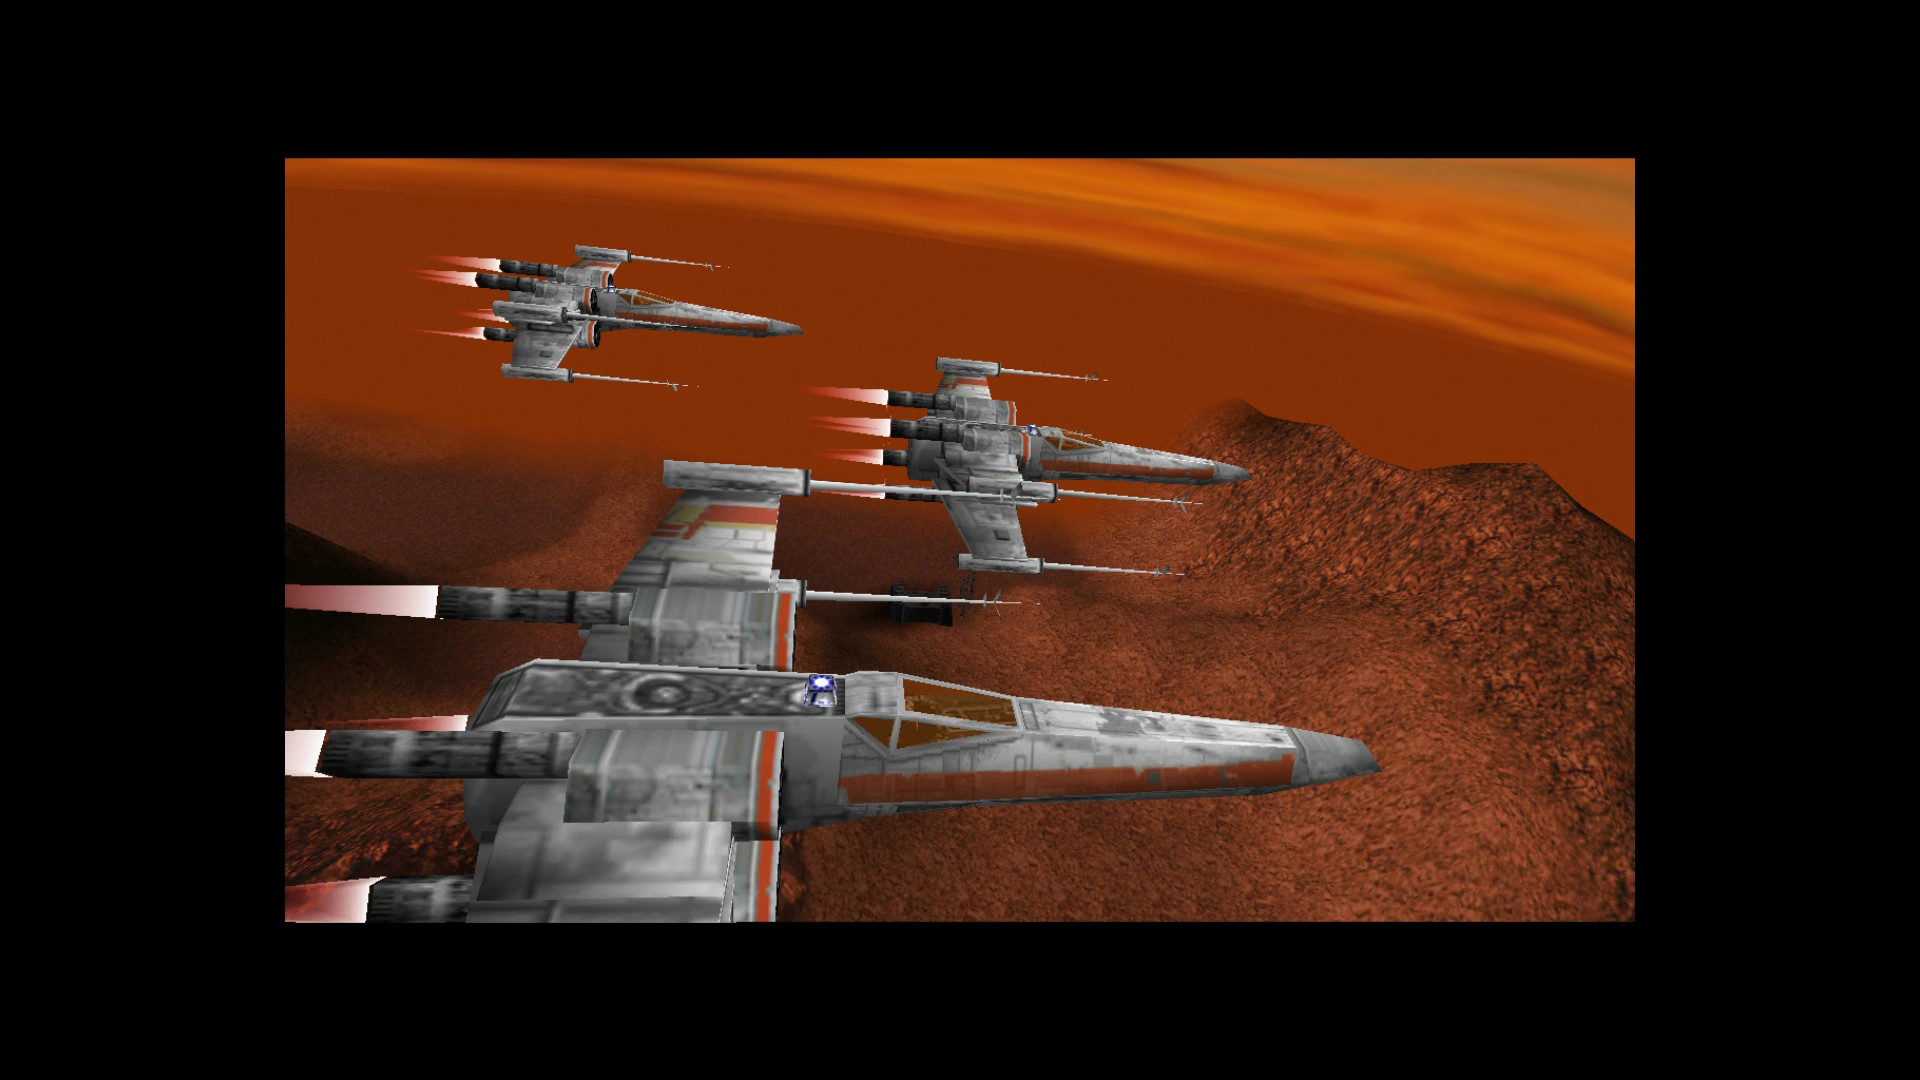 does rogue squadron 3d work on windows 10